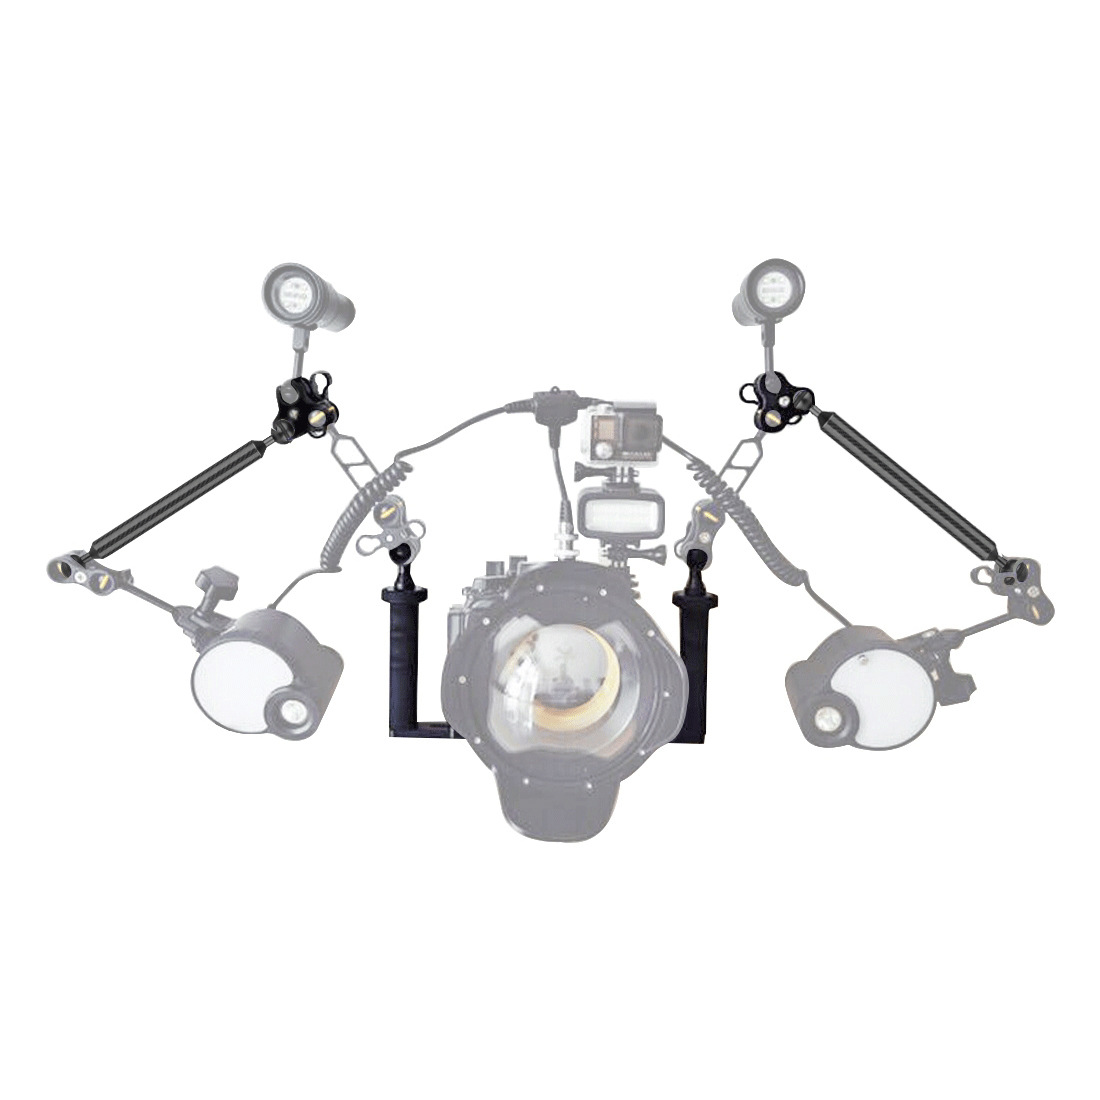 PULUZ-PU3041-100M-Underwater-Diving-Tray-Stabilizer-with-Dual-Ball-Clamp-Floating-Magic-Arm-for-Vide-1574563